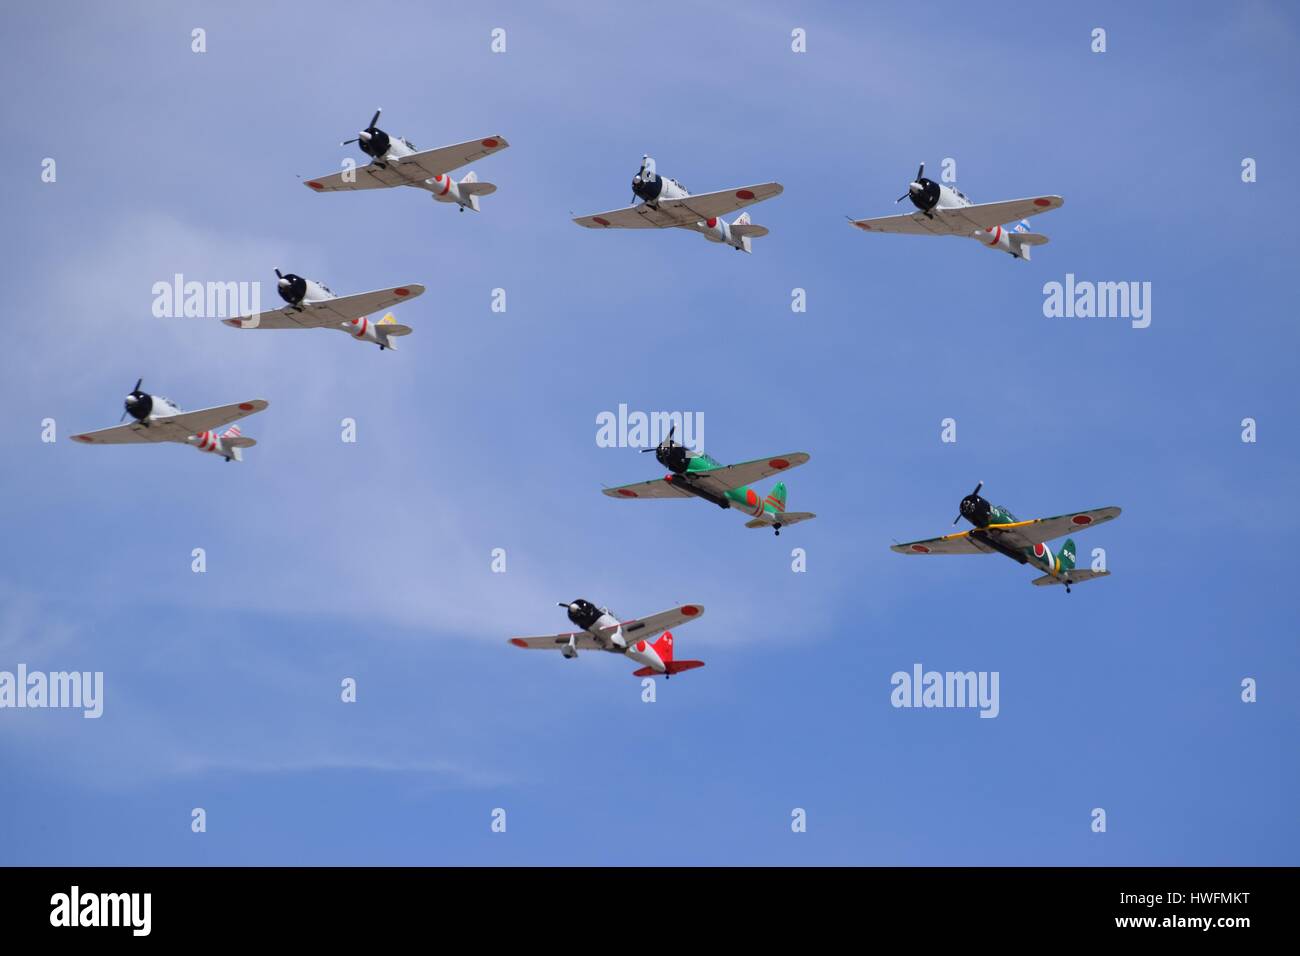 Japanese Zero Fighter Planes (Los Angeles Air Show-March 19, 2016) Stock Photo